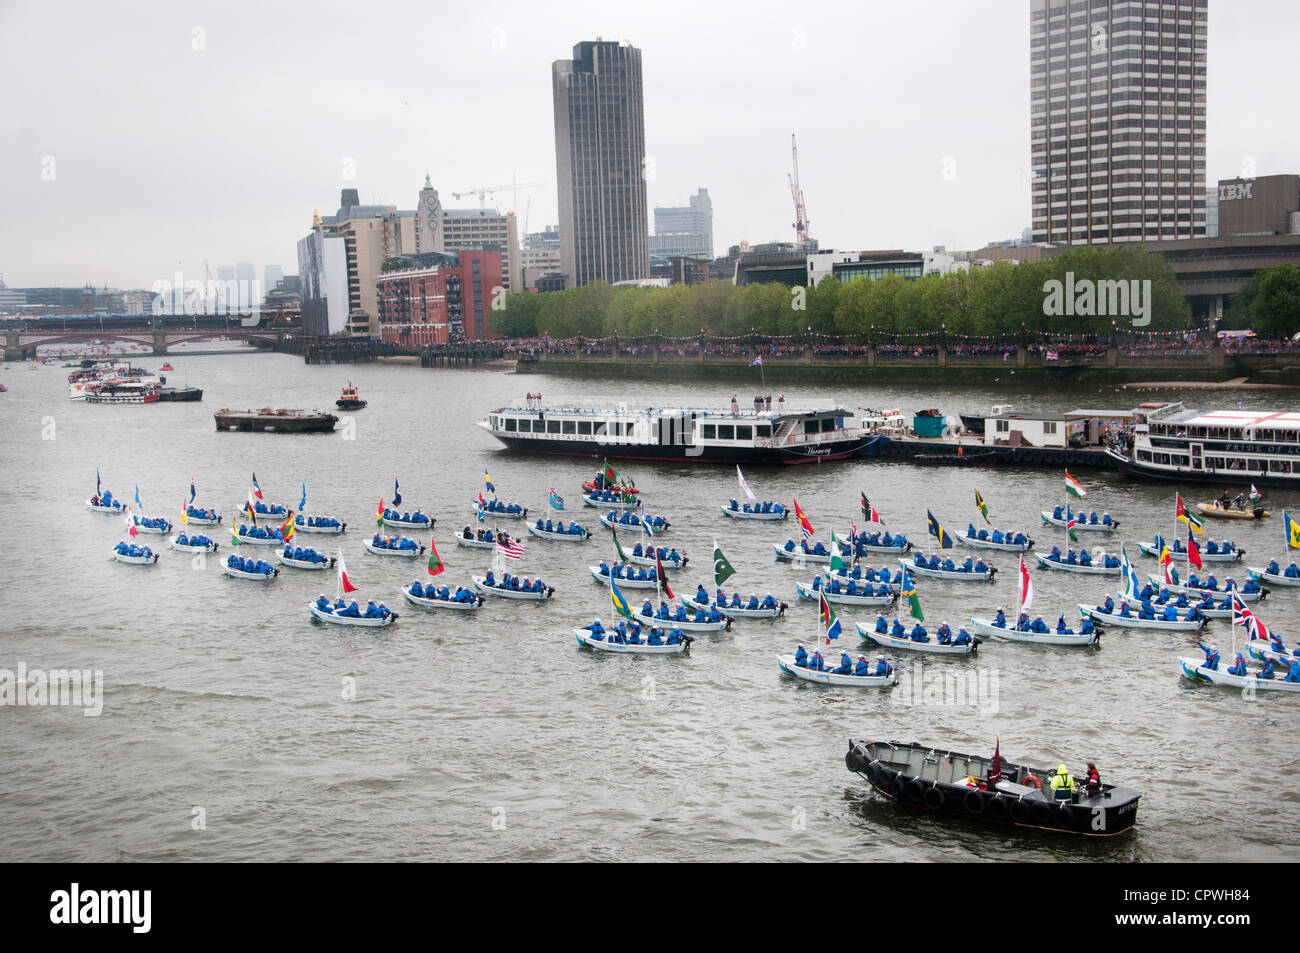 The river Thames flotilla made up of 1000 boats - sea cadets in small boats each with a commonwealth flag. Stock Photo